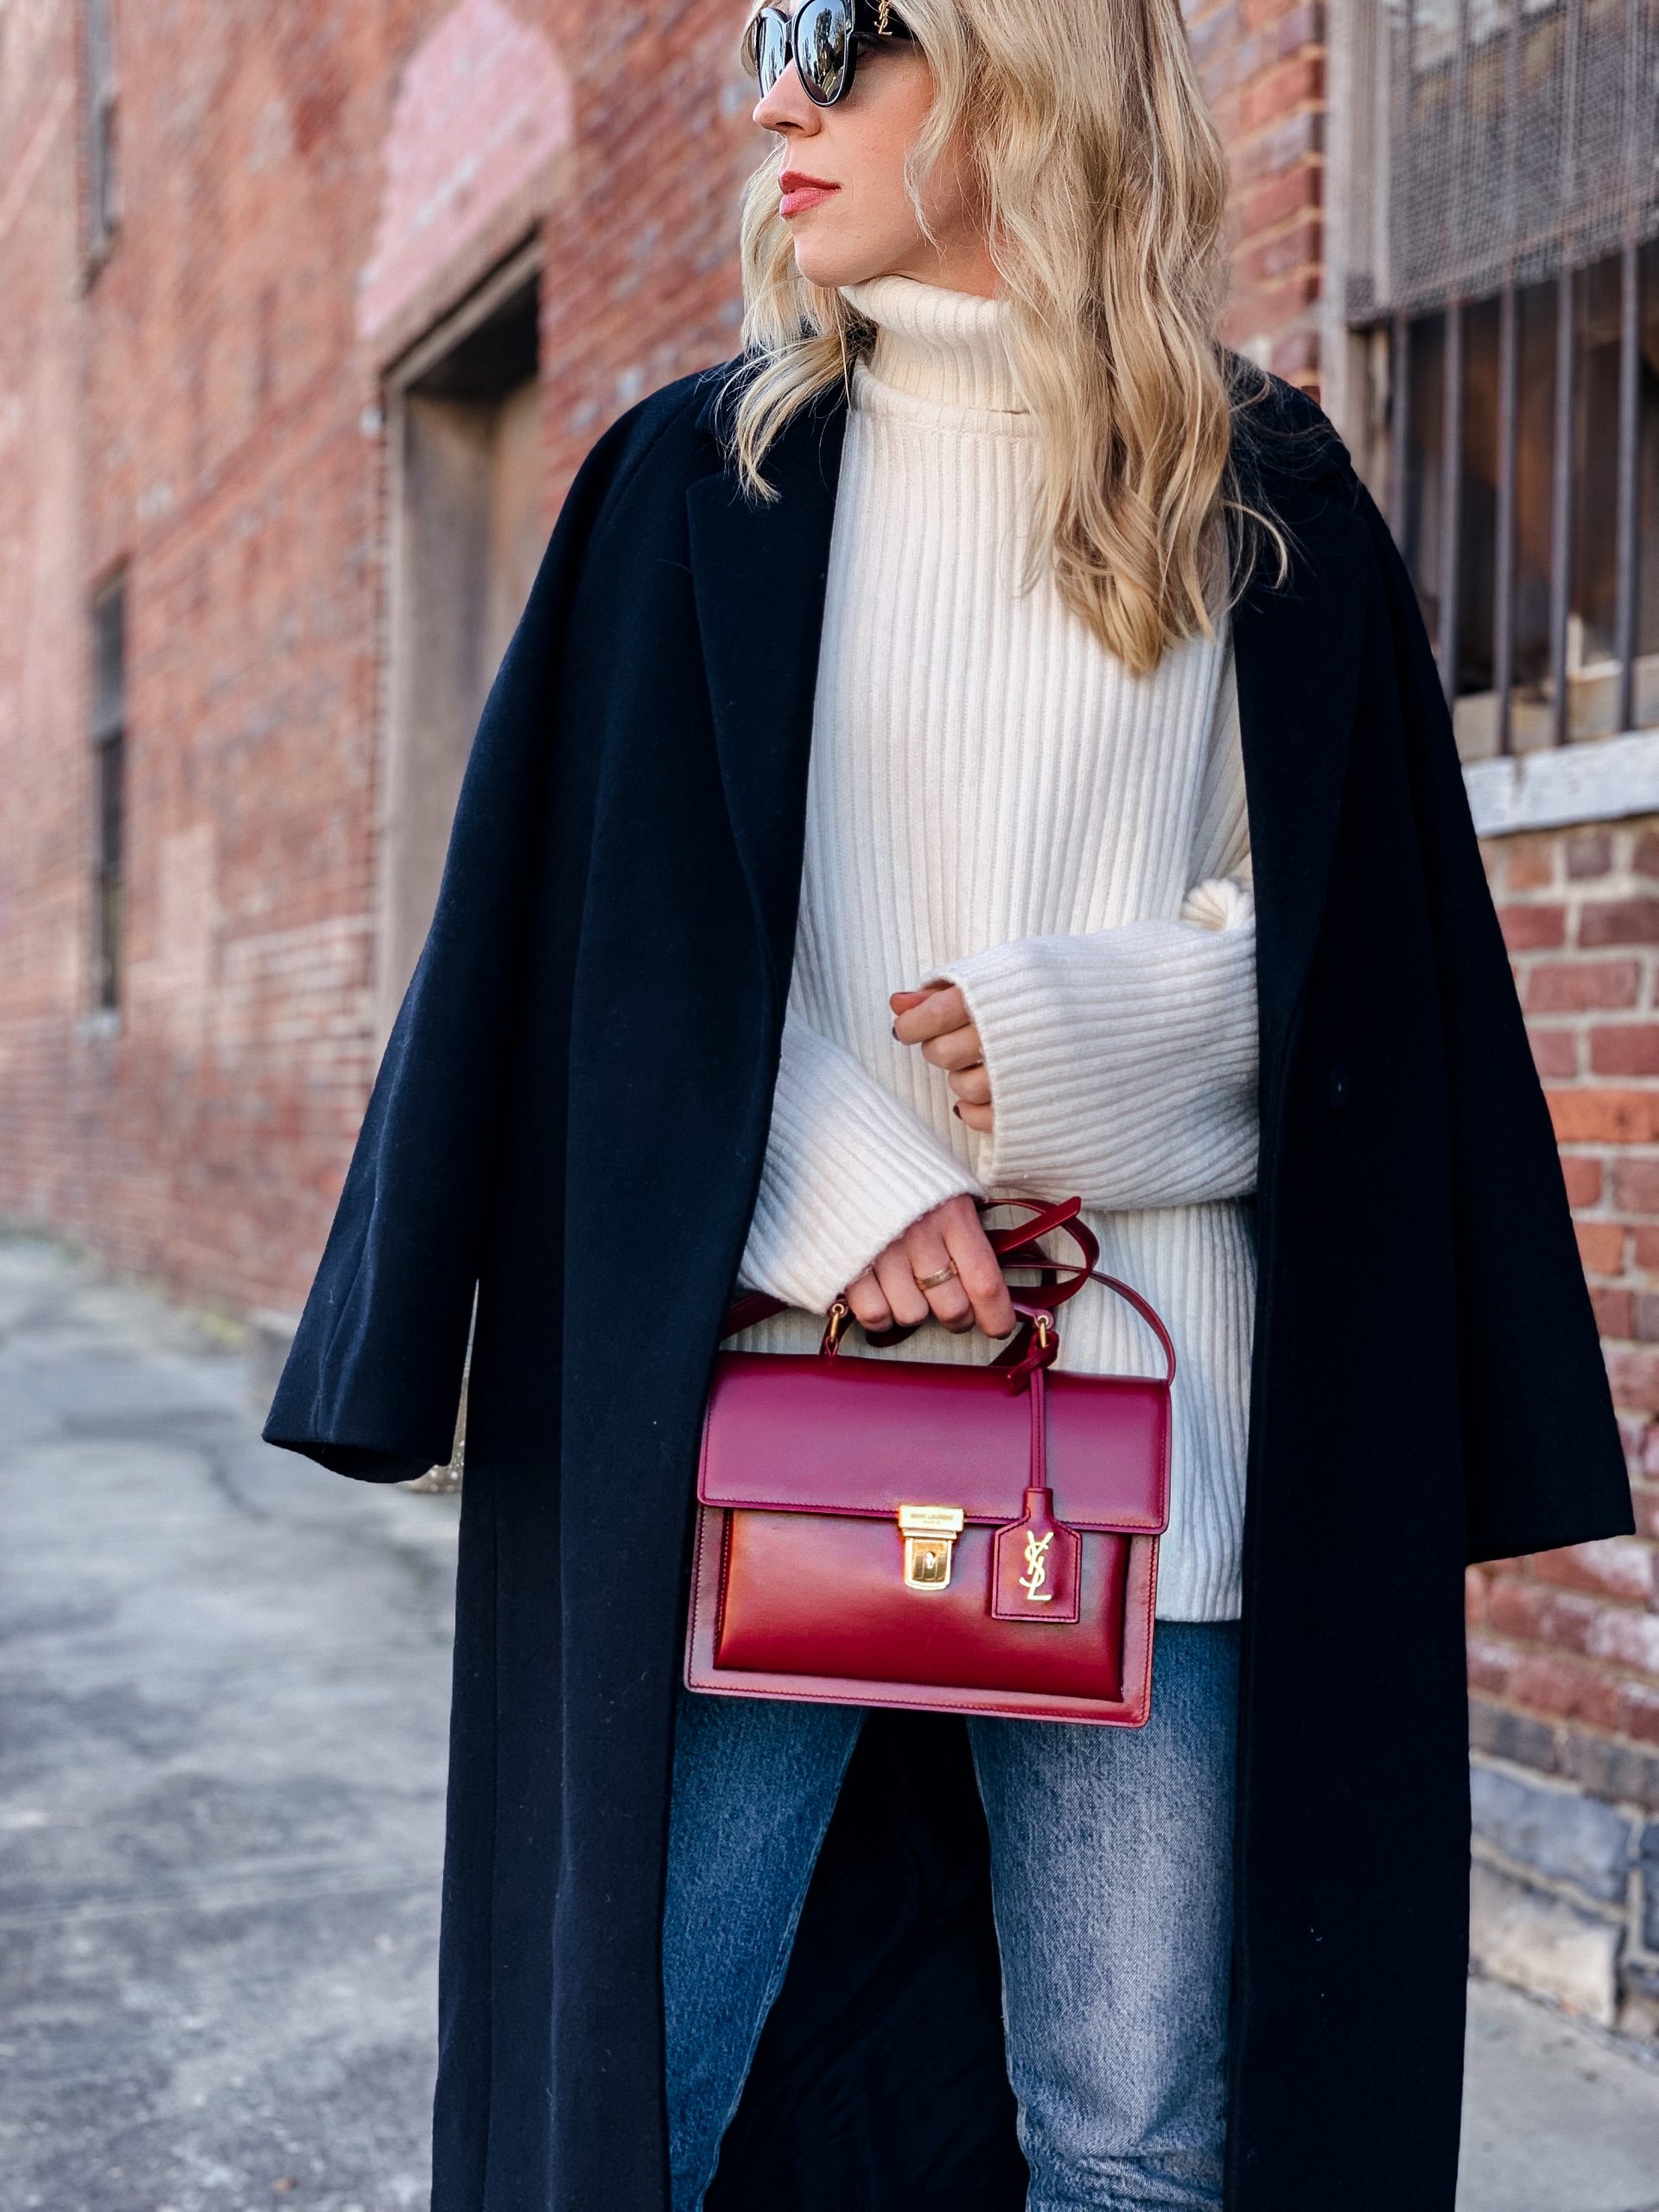 Three YSL Bags Perfect for Your Holiday Party Outfits